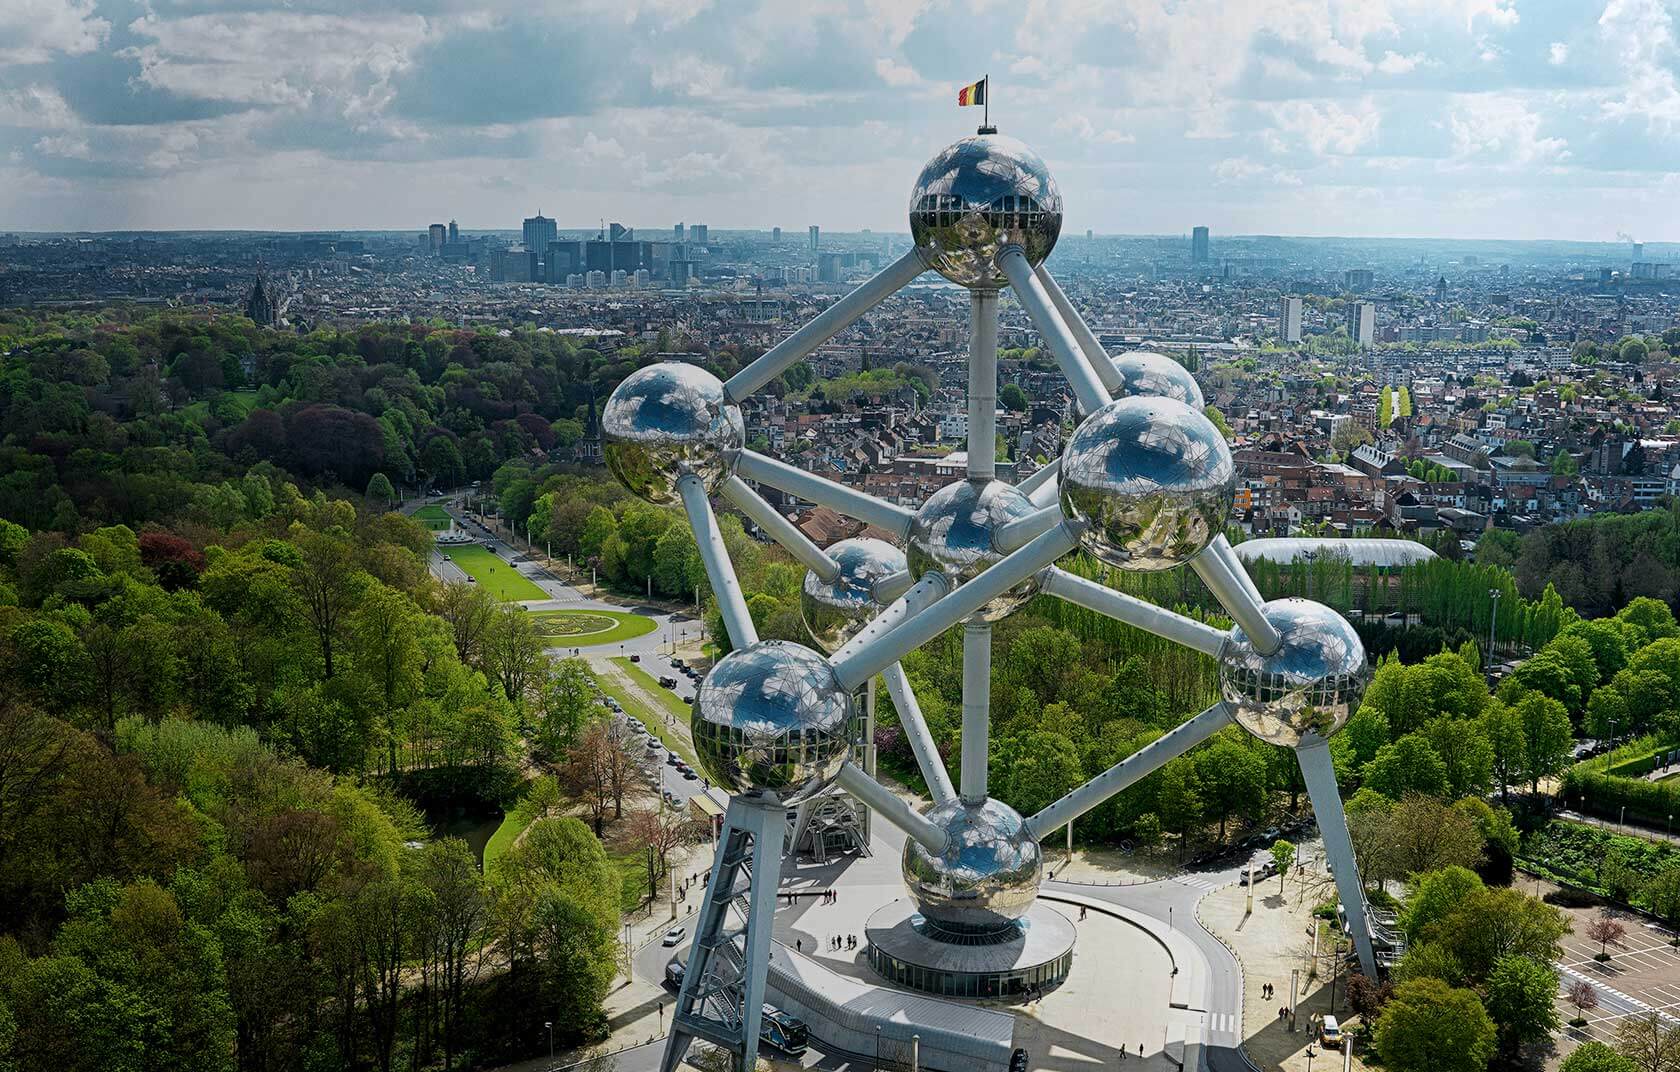 Tuesday’s marvels of engineering: Atomium